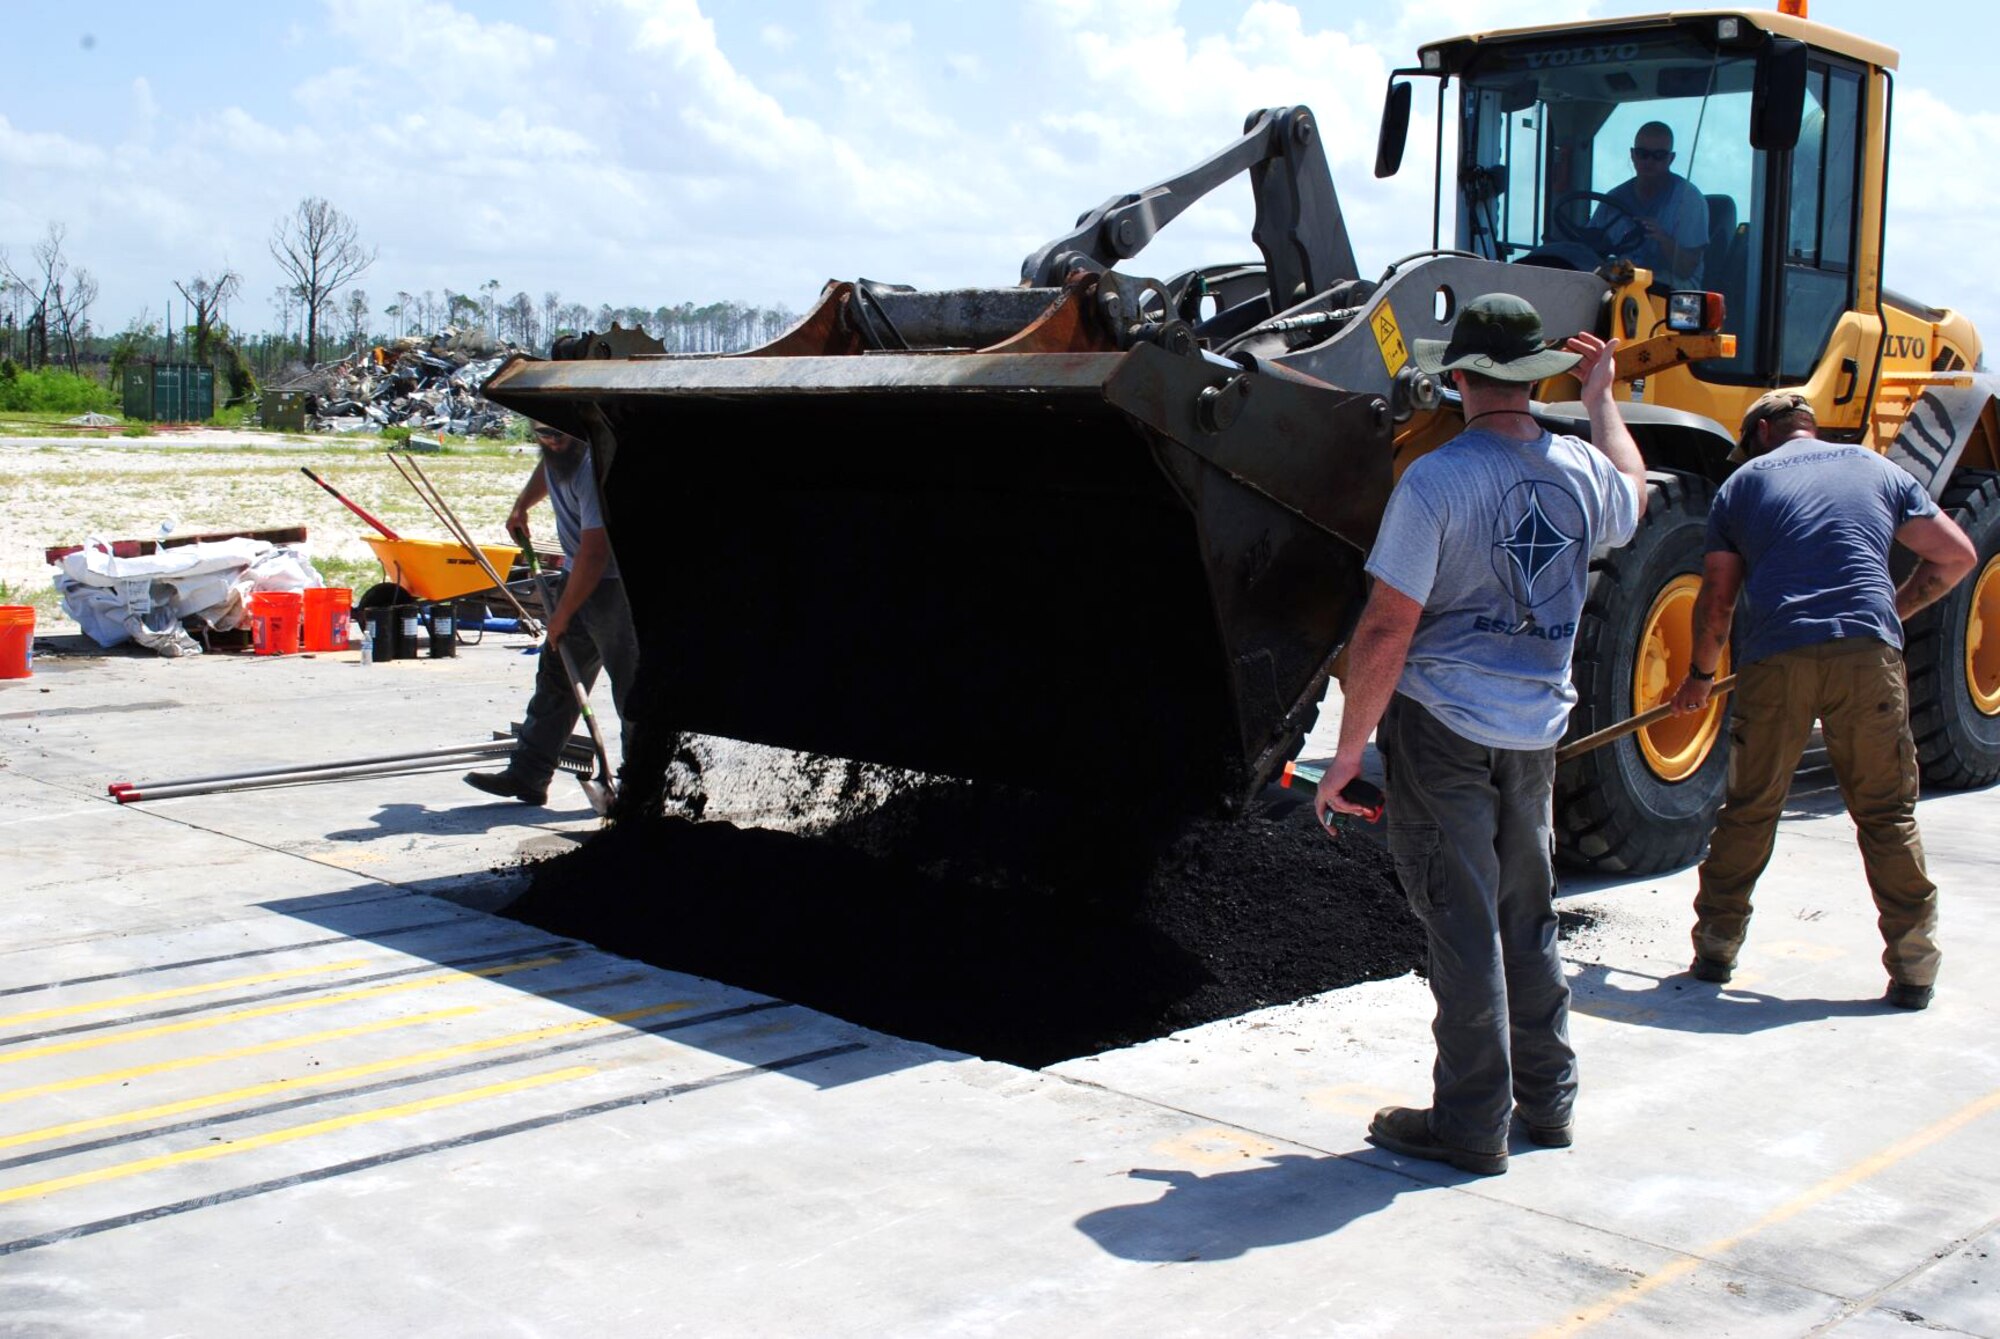 The pavements team with the Air Force Civil Engineer Center drops and evens out asphalt on top of the backfill material on July 16, 2019 at the 9700 Area at Tyndall Air Force Base, Florida. (U.S. Air Force photo by Grace Bland)